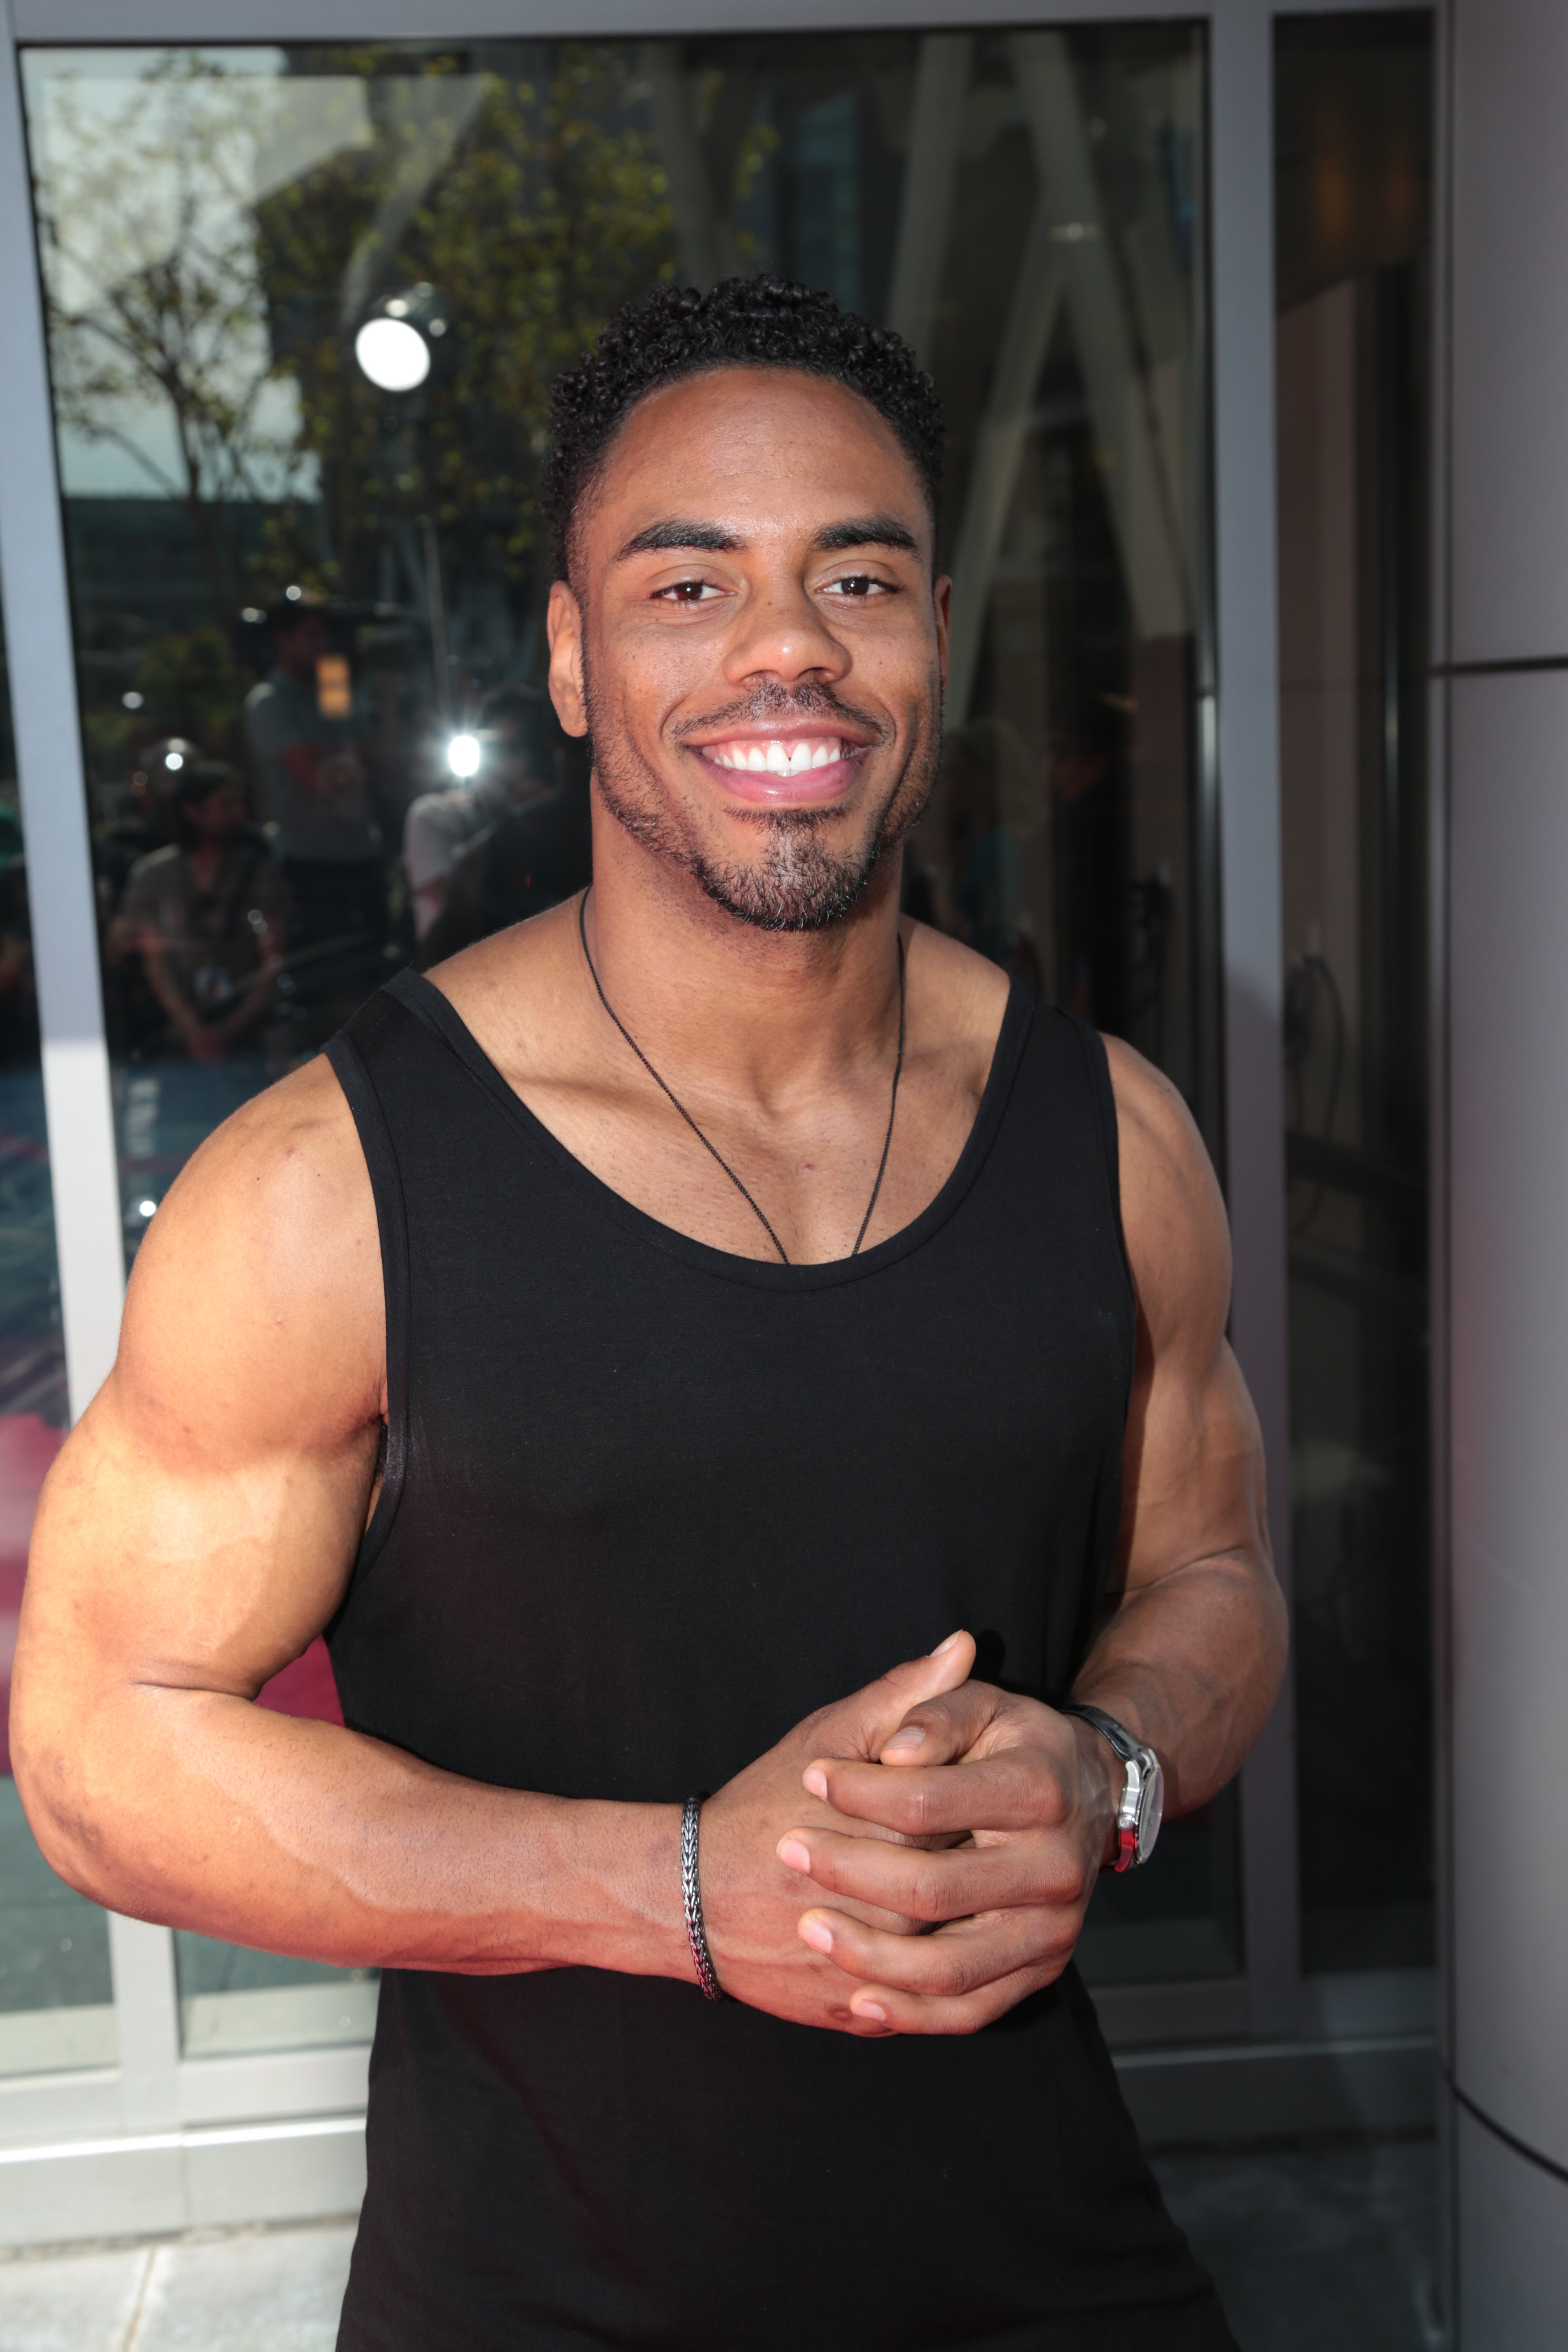 DWTS Champ Rashad Jennings Needs A Dance Partner: 'If You Can't Get Along With My Mom, Something's Wrong'
